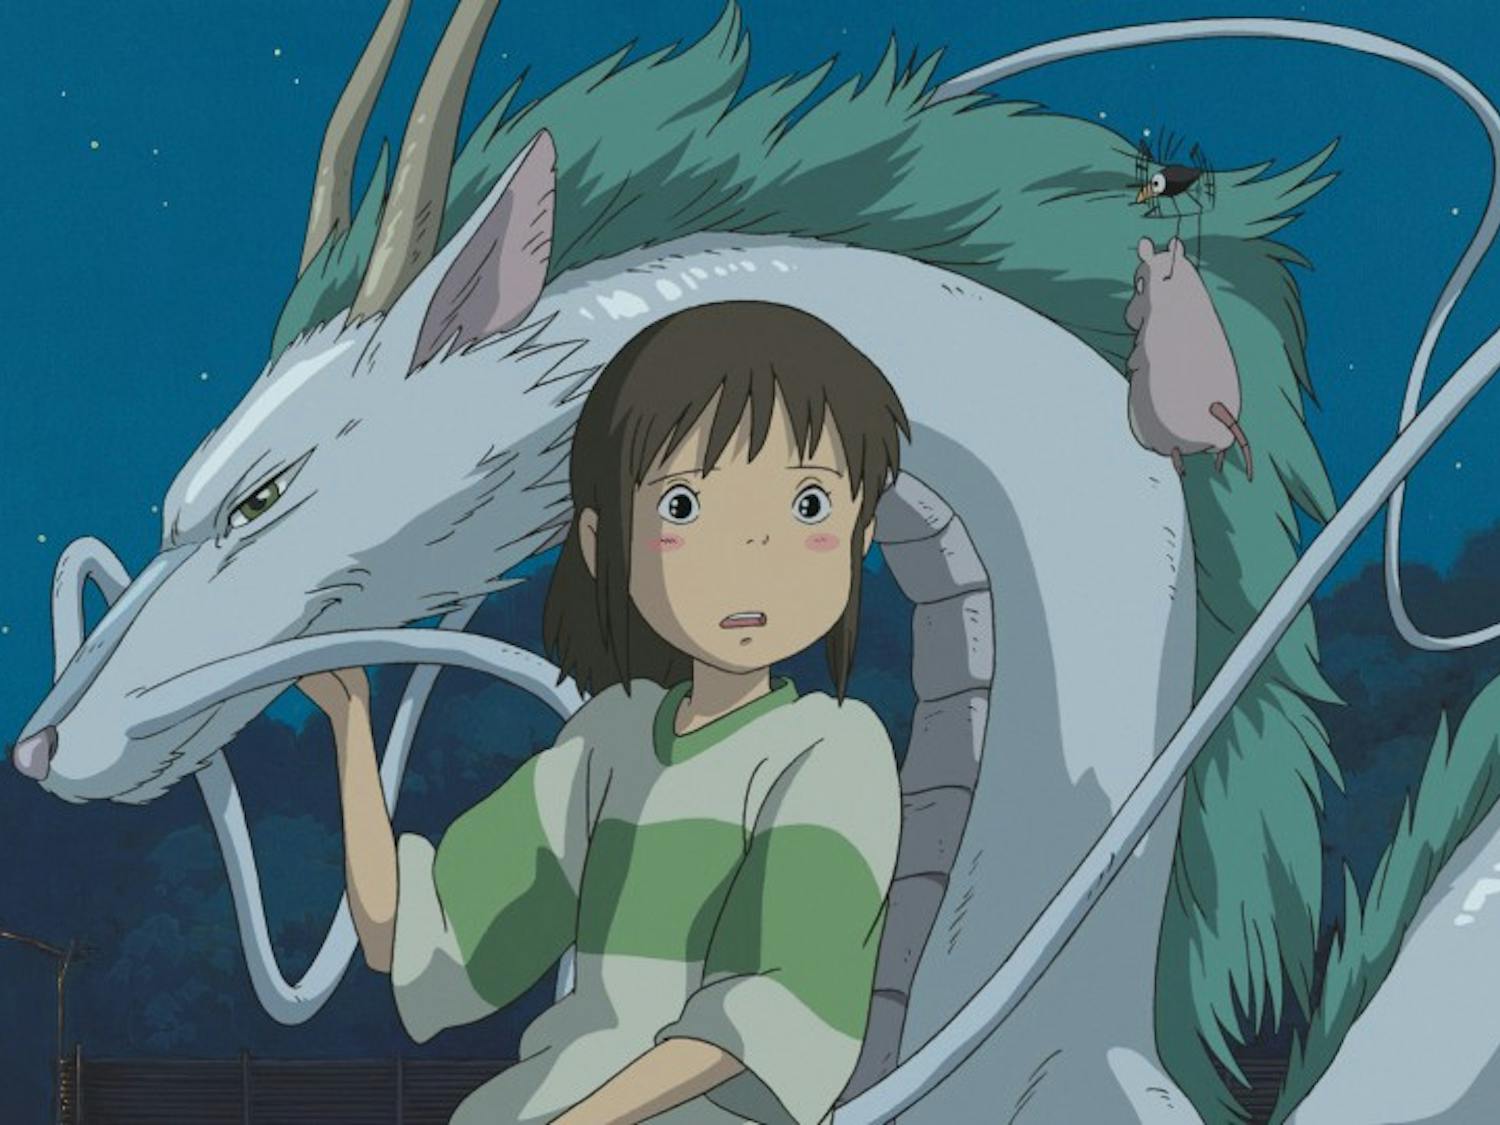 "Spirited Away" is one of many films being shown as part of the&nbsp;Studio Ghibli Collection Film Series.